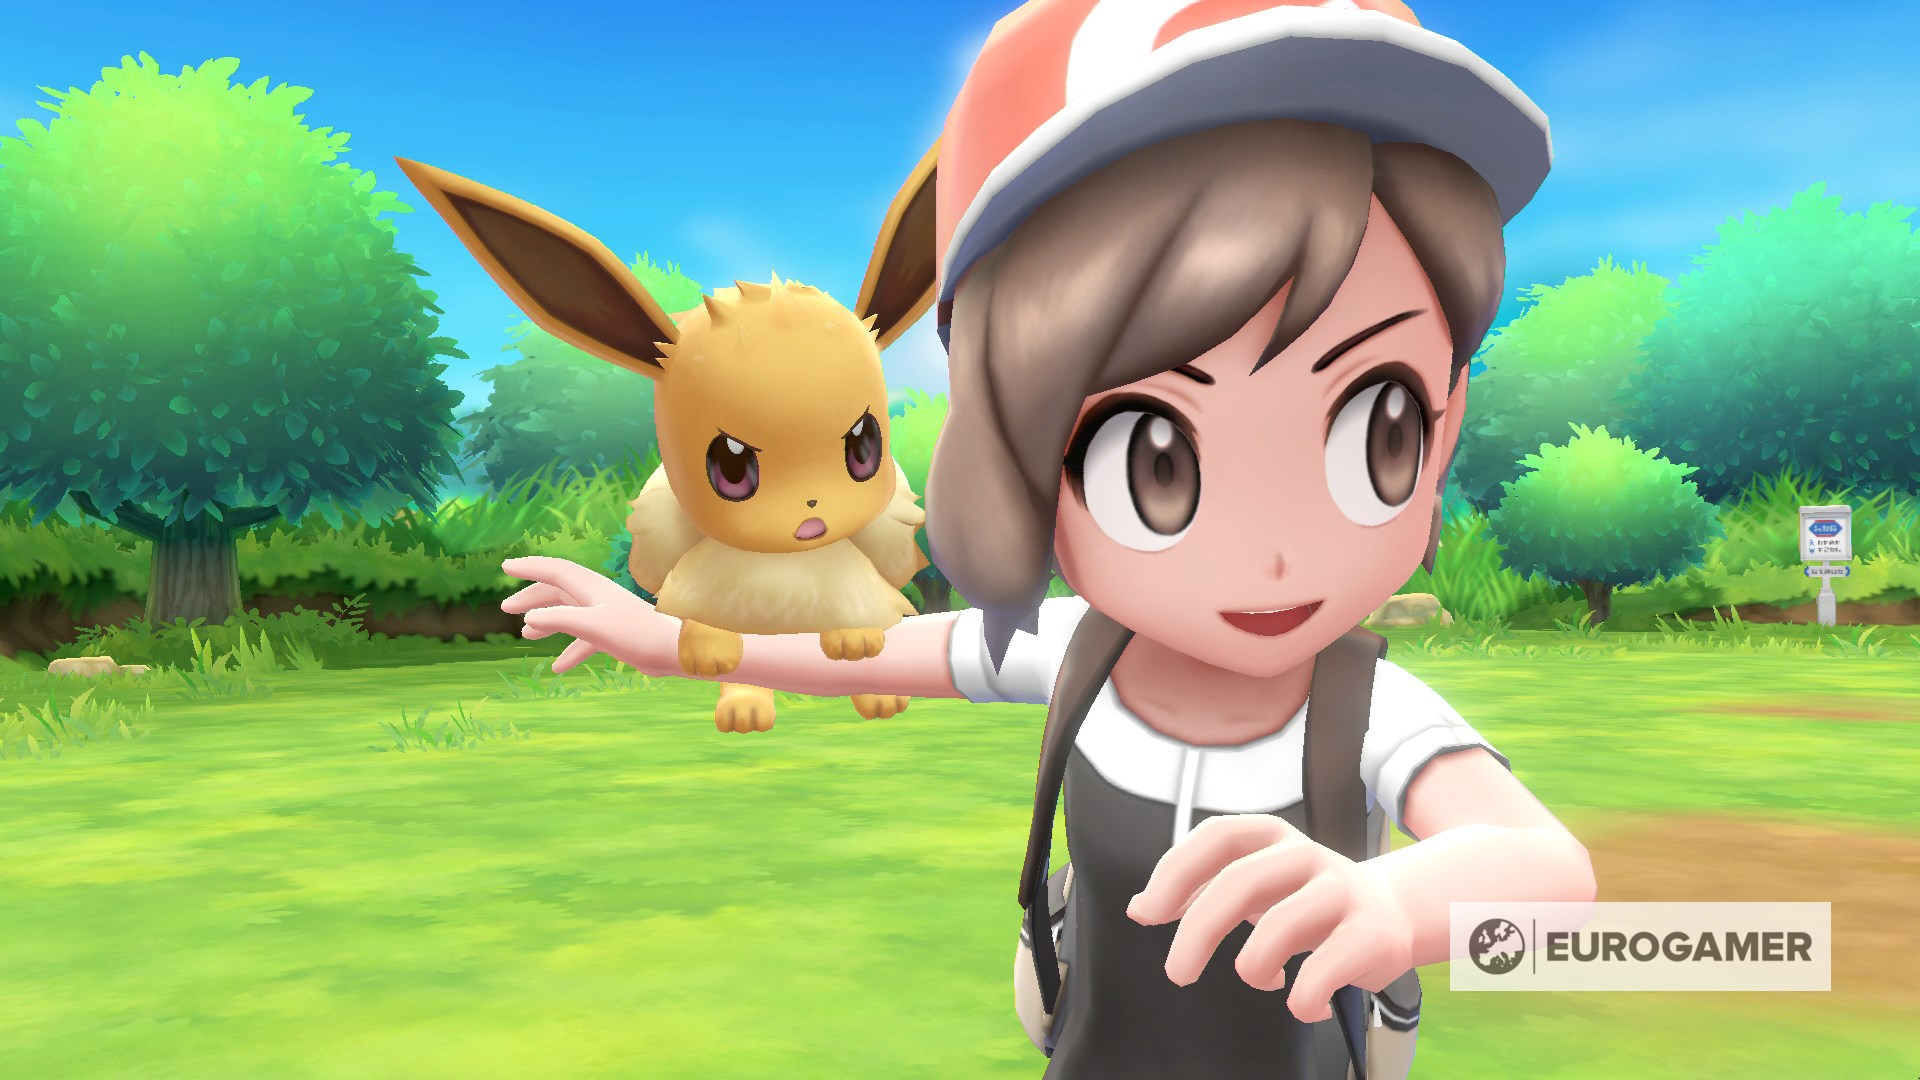 Pokémon Lets Go! Pikachu and Eevee confirmed for Nintendo Switch featuring Pokémon Gostyle catching